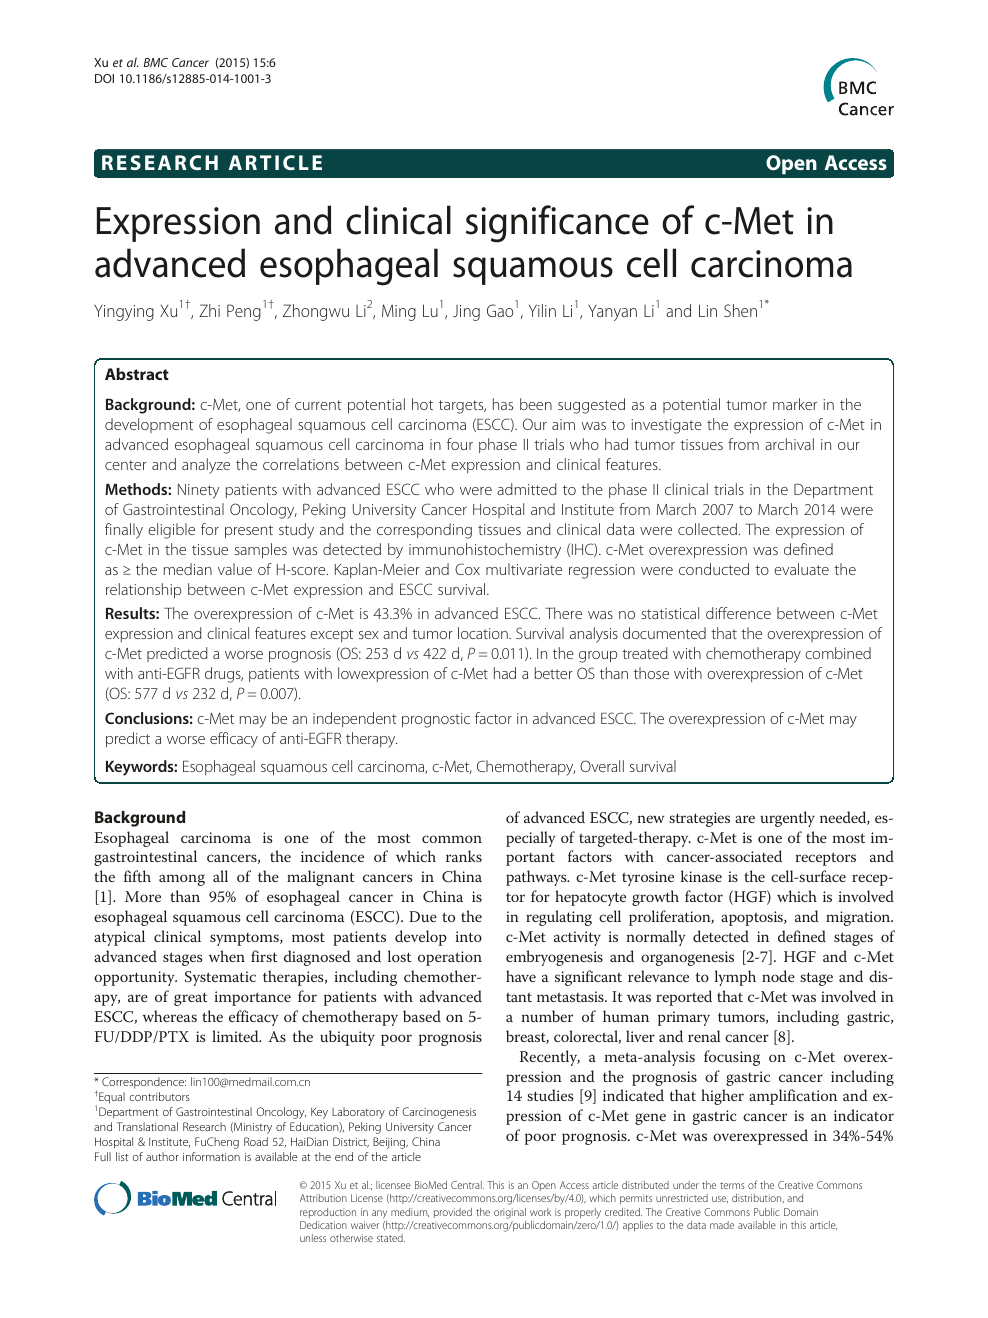 germ Suburb Lao Expression and clinical significance of c-Met in advanced esophageal squamous  cell carcinoma – topic of research paper in Clinical medicine. Download  scholarly article PDF and read for free on CyberLeninka open science